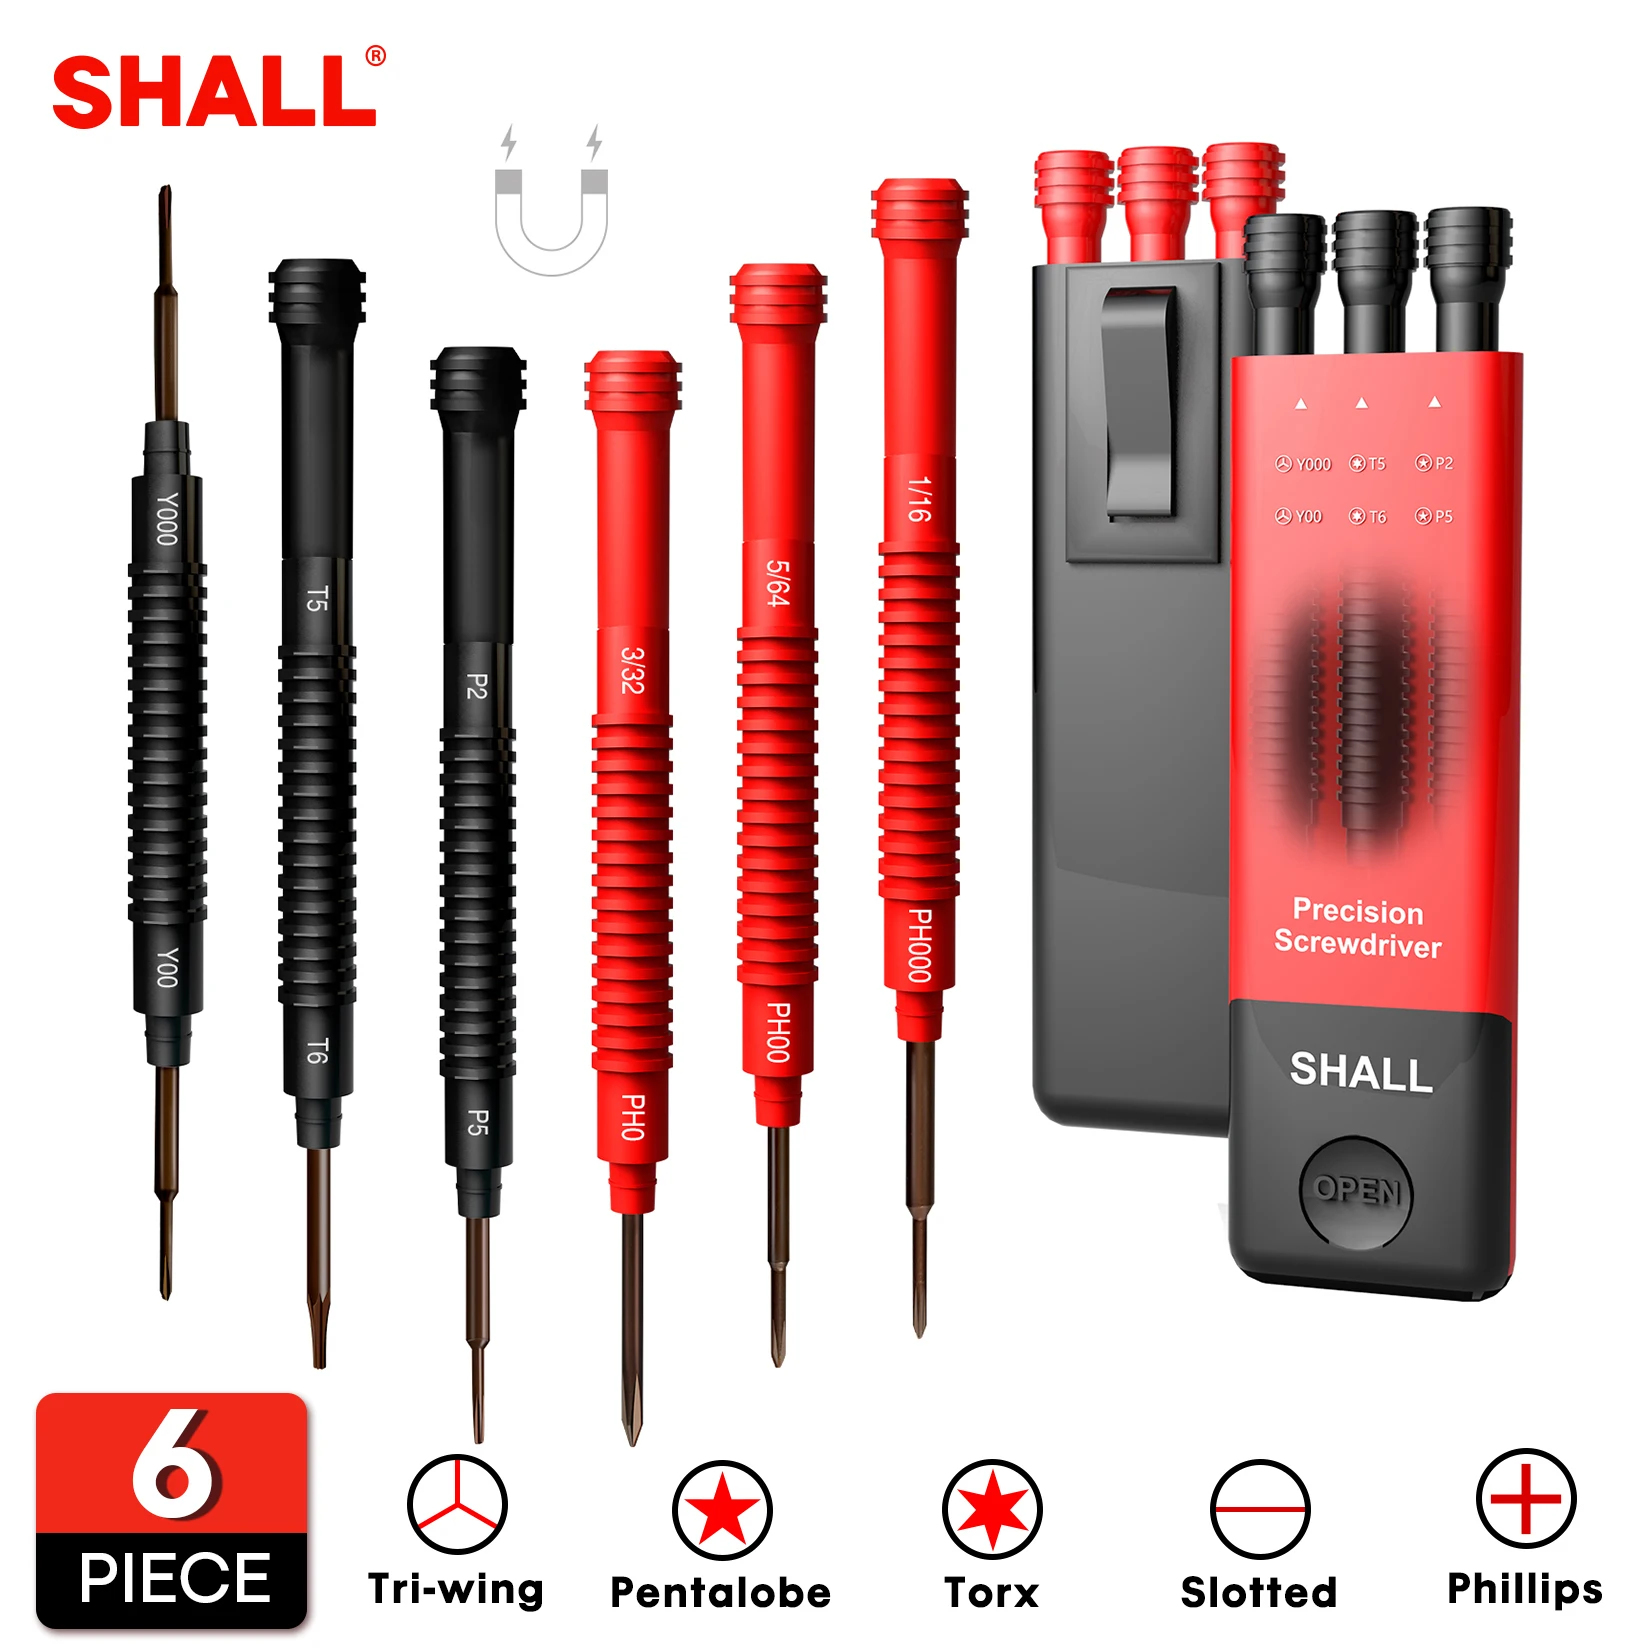 SHALL 6-Piece Precision Screwdriver Set 12 Sizes Magnetic screwdriver Kit multifunctional tools for home repair Hand tools